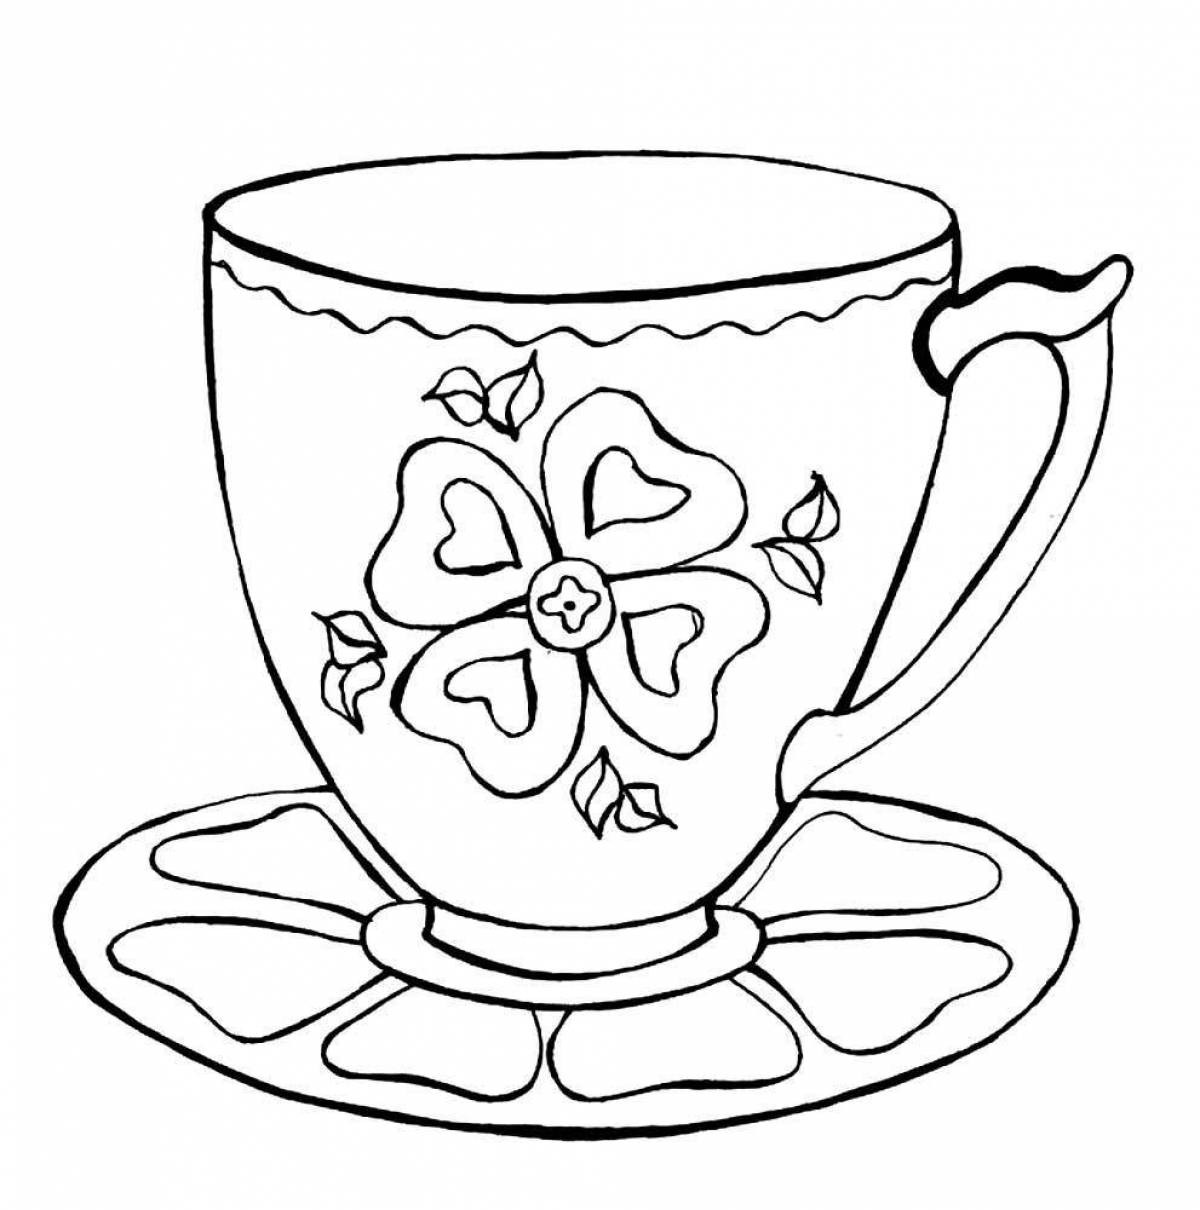 Nice cup and saucer coloring book for preschoolers